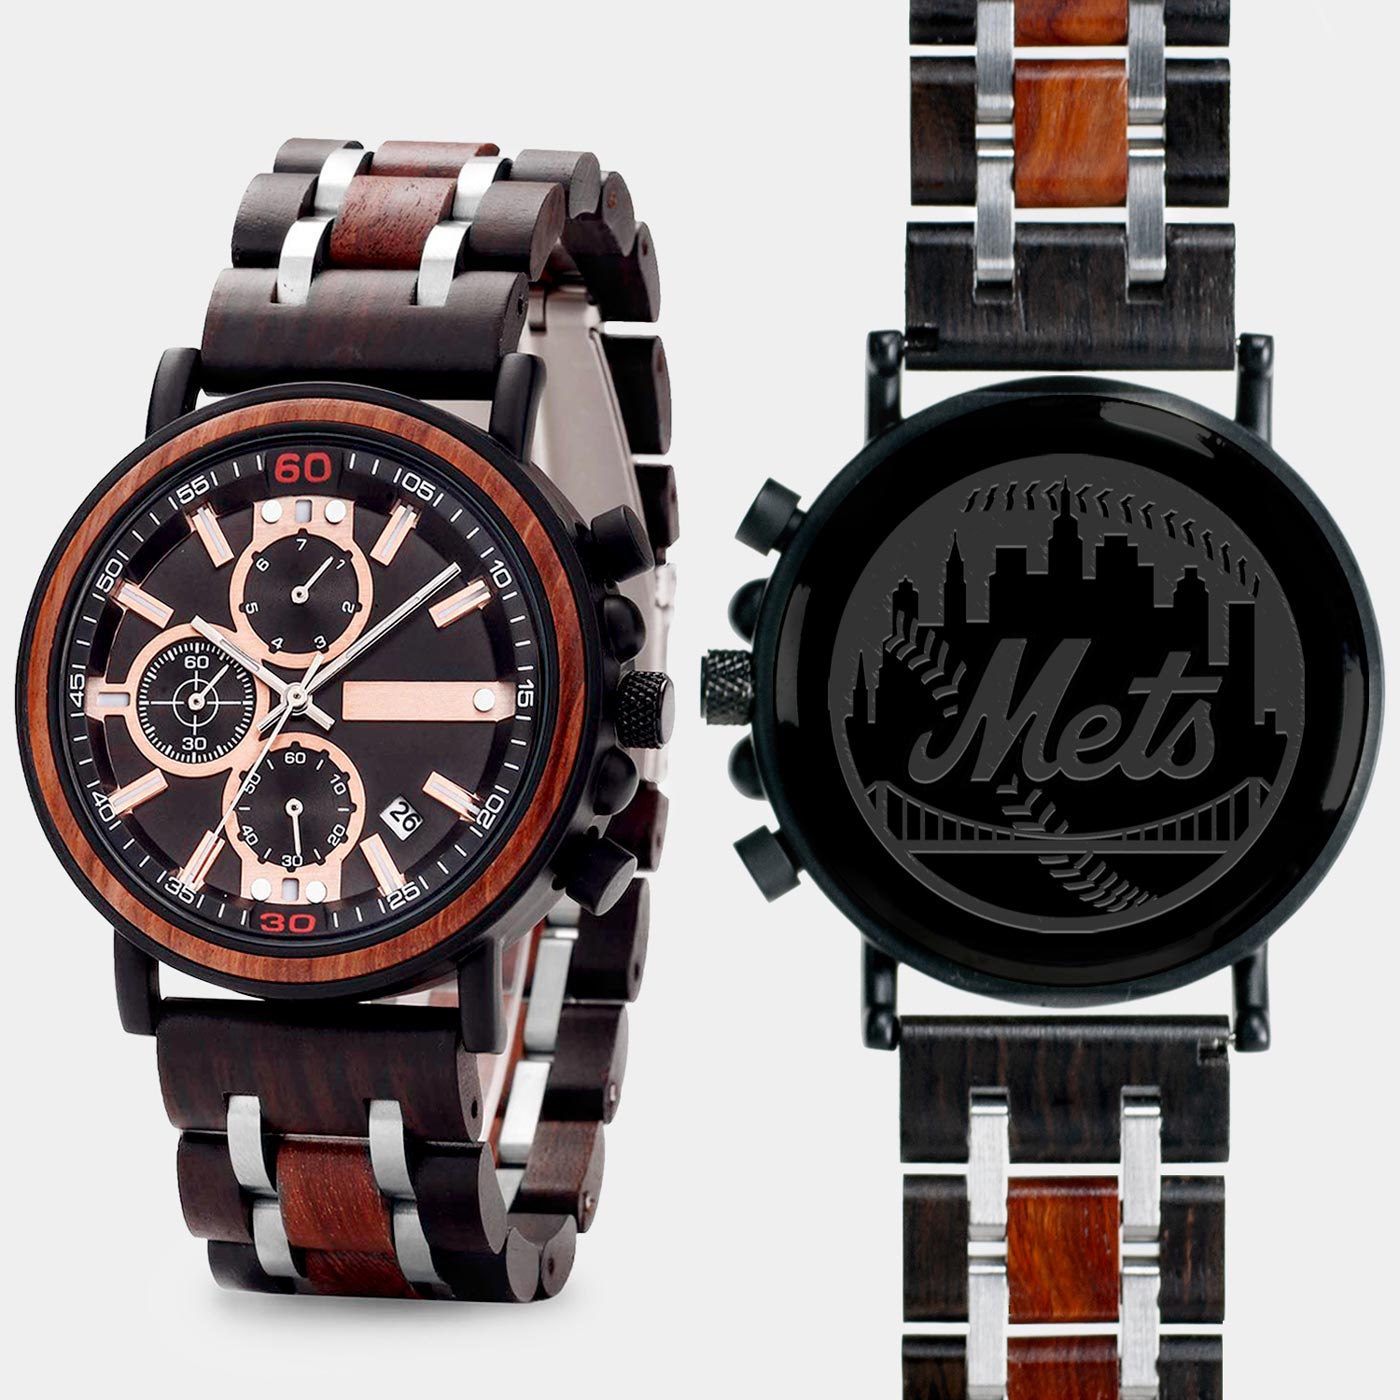 New York Mets Mens Wrist Watch  - Personalized New York Mets Mens Watches - Custom Gifts For Him, Birthday Gifts, Gift For Dad - Best 2022 New York Mets Christmas Gifts - Black 45mm MLB Wood Watch